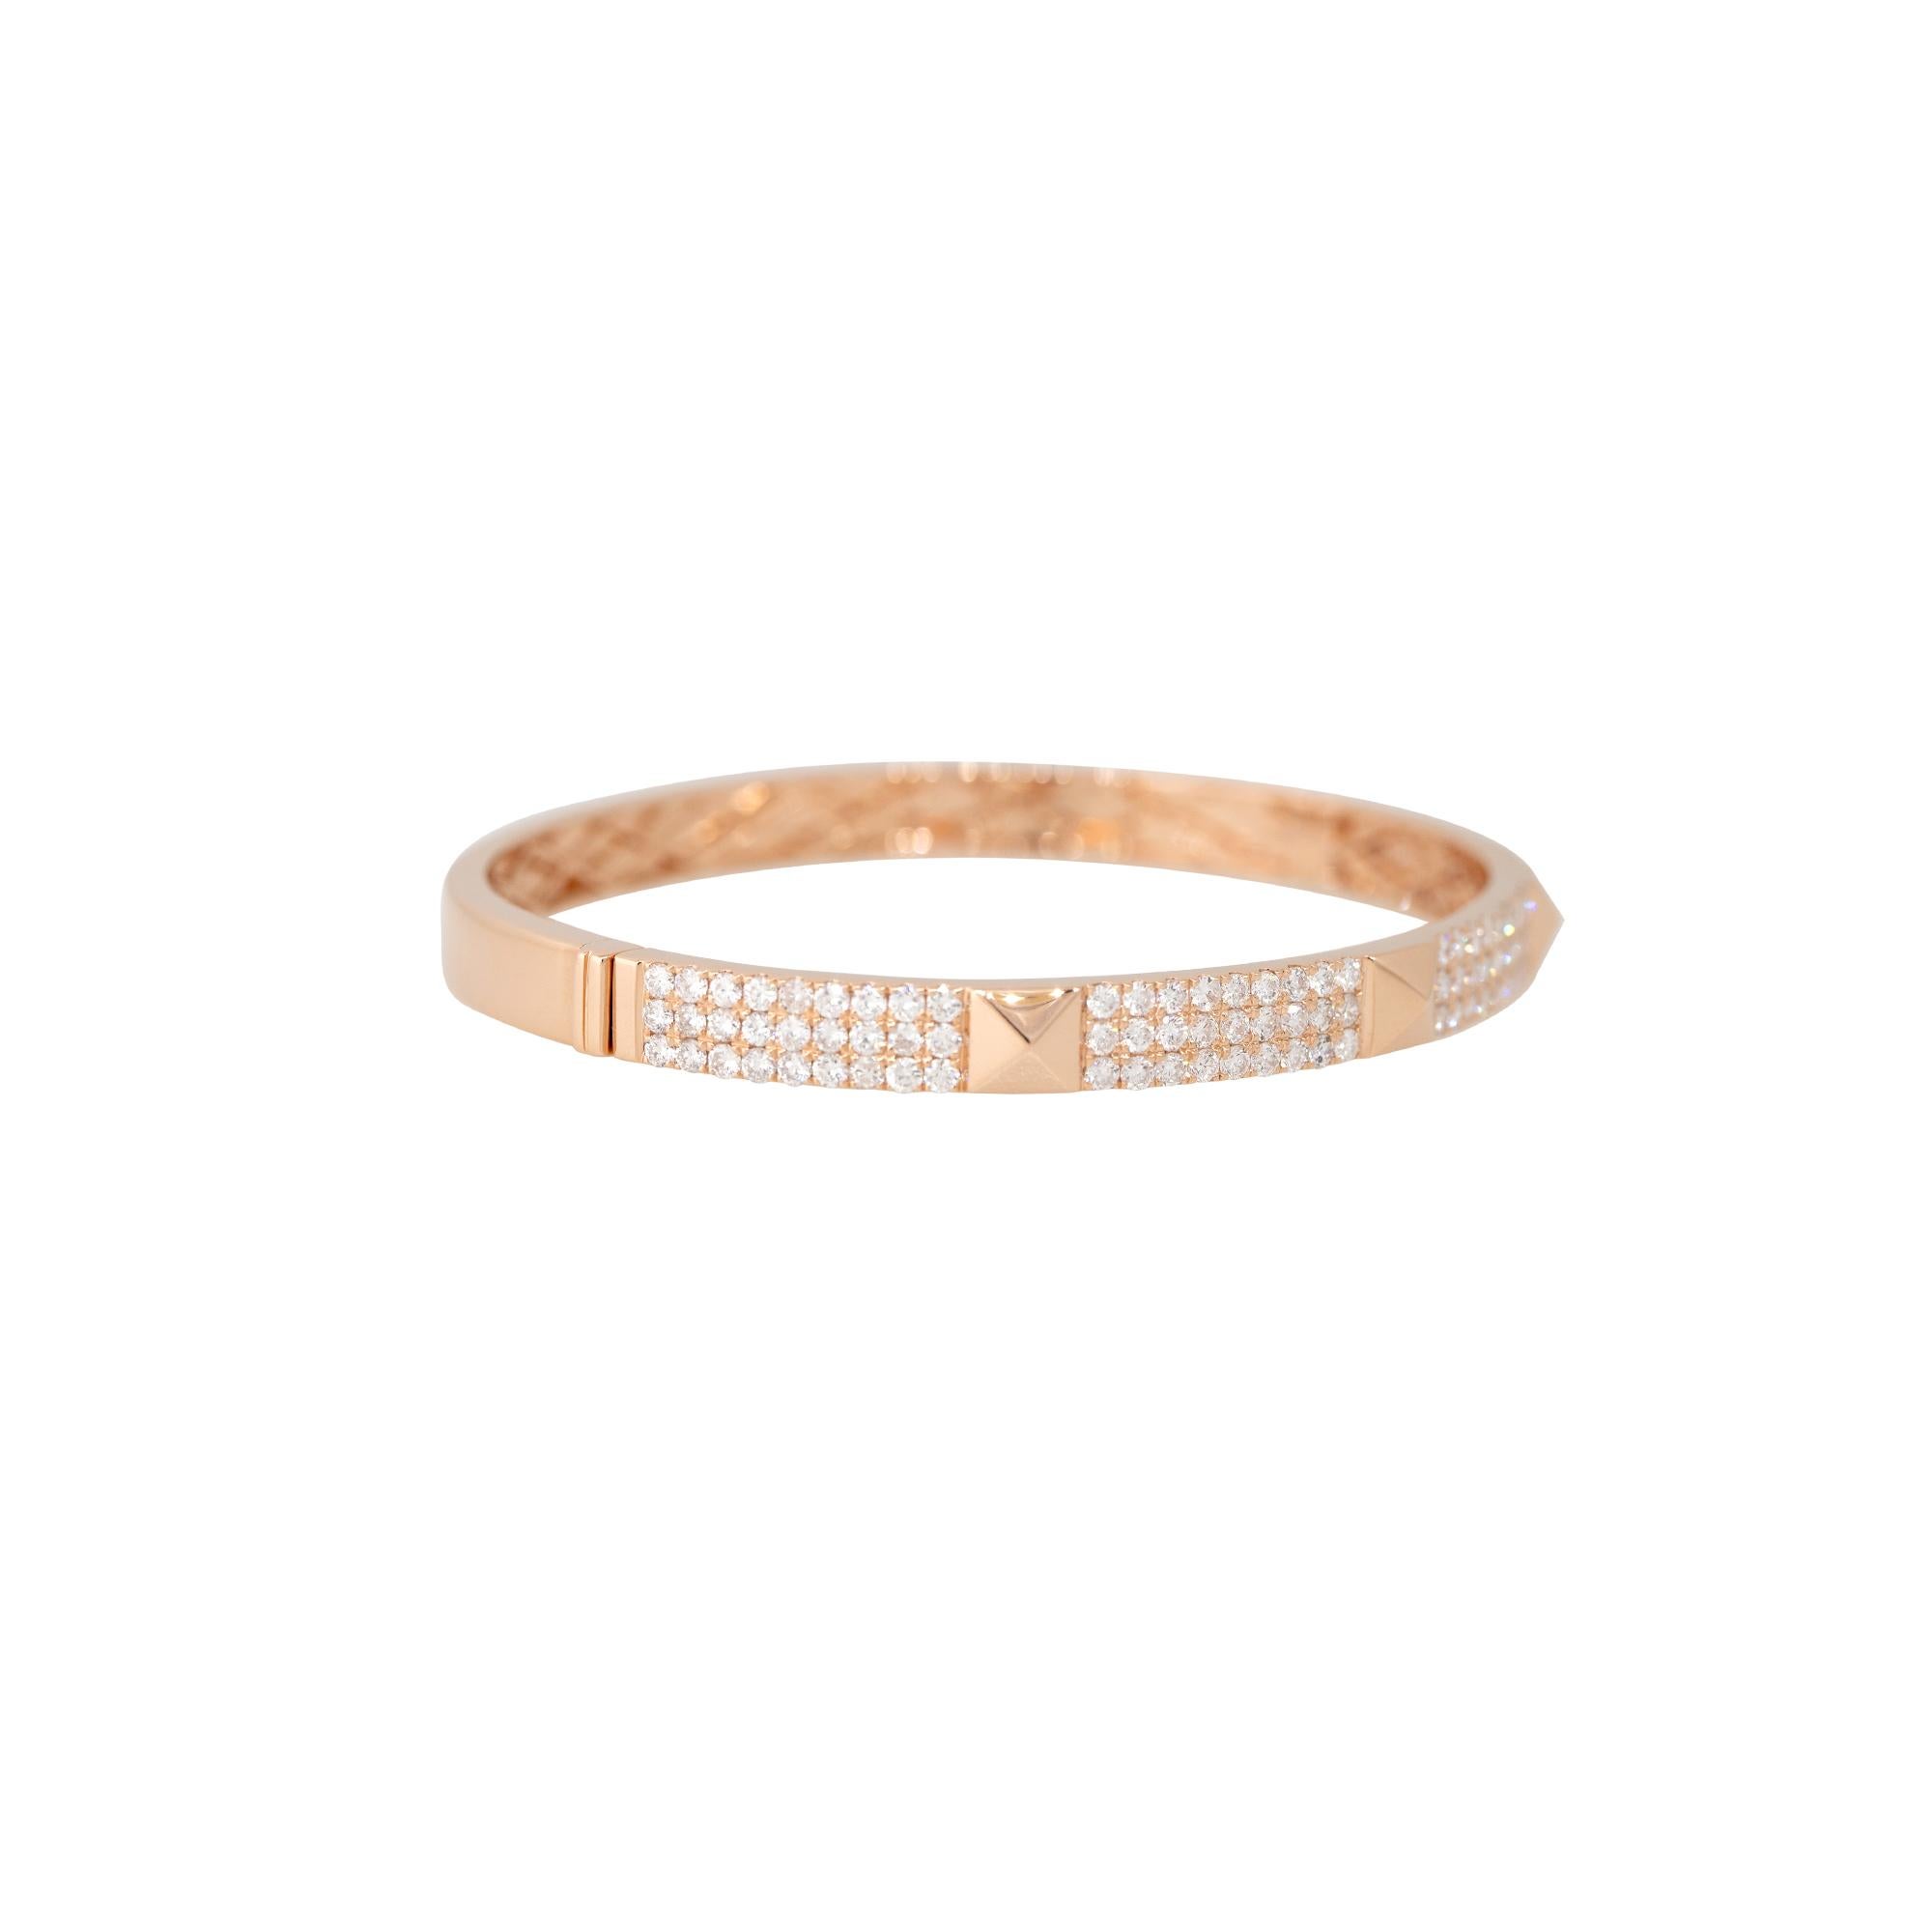 18k Rose Gold 2.40ctw Pave Diamond Rock Stud Bangle Bracelet
Material: 18k Rose Gold
Diamond Details: There are approximately 2.40 carats of round brilliant-cut diamonds halfway around the bangle
Diamond Clarity: All diamonds are approximately SI